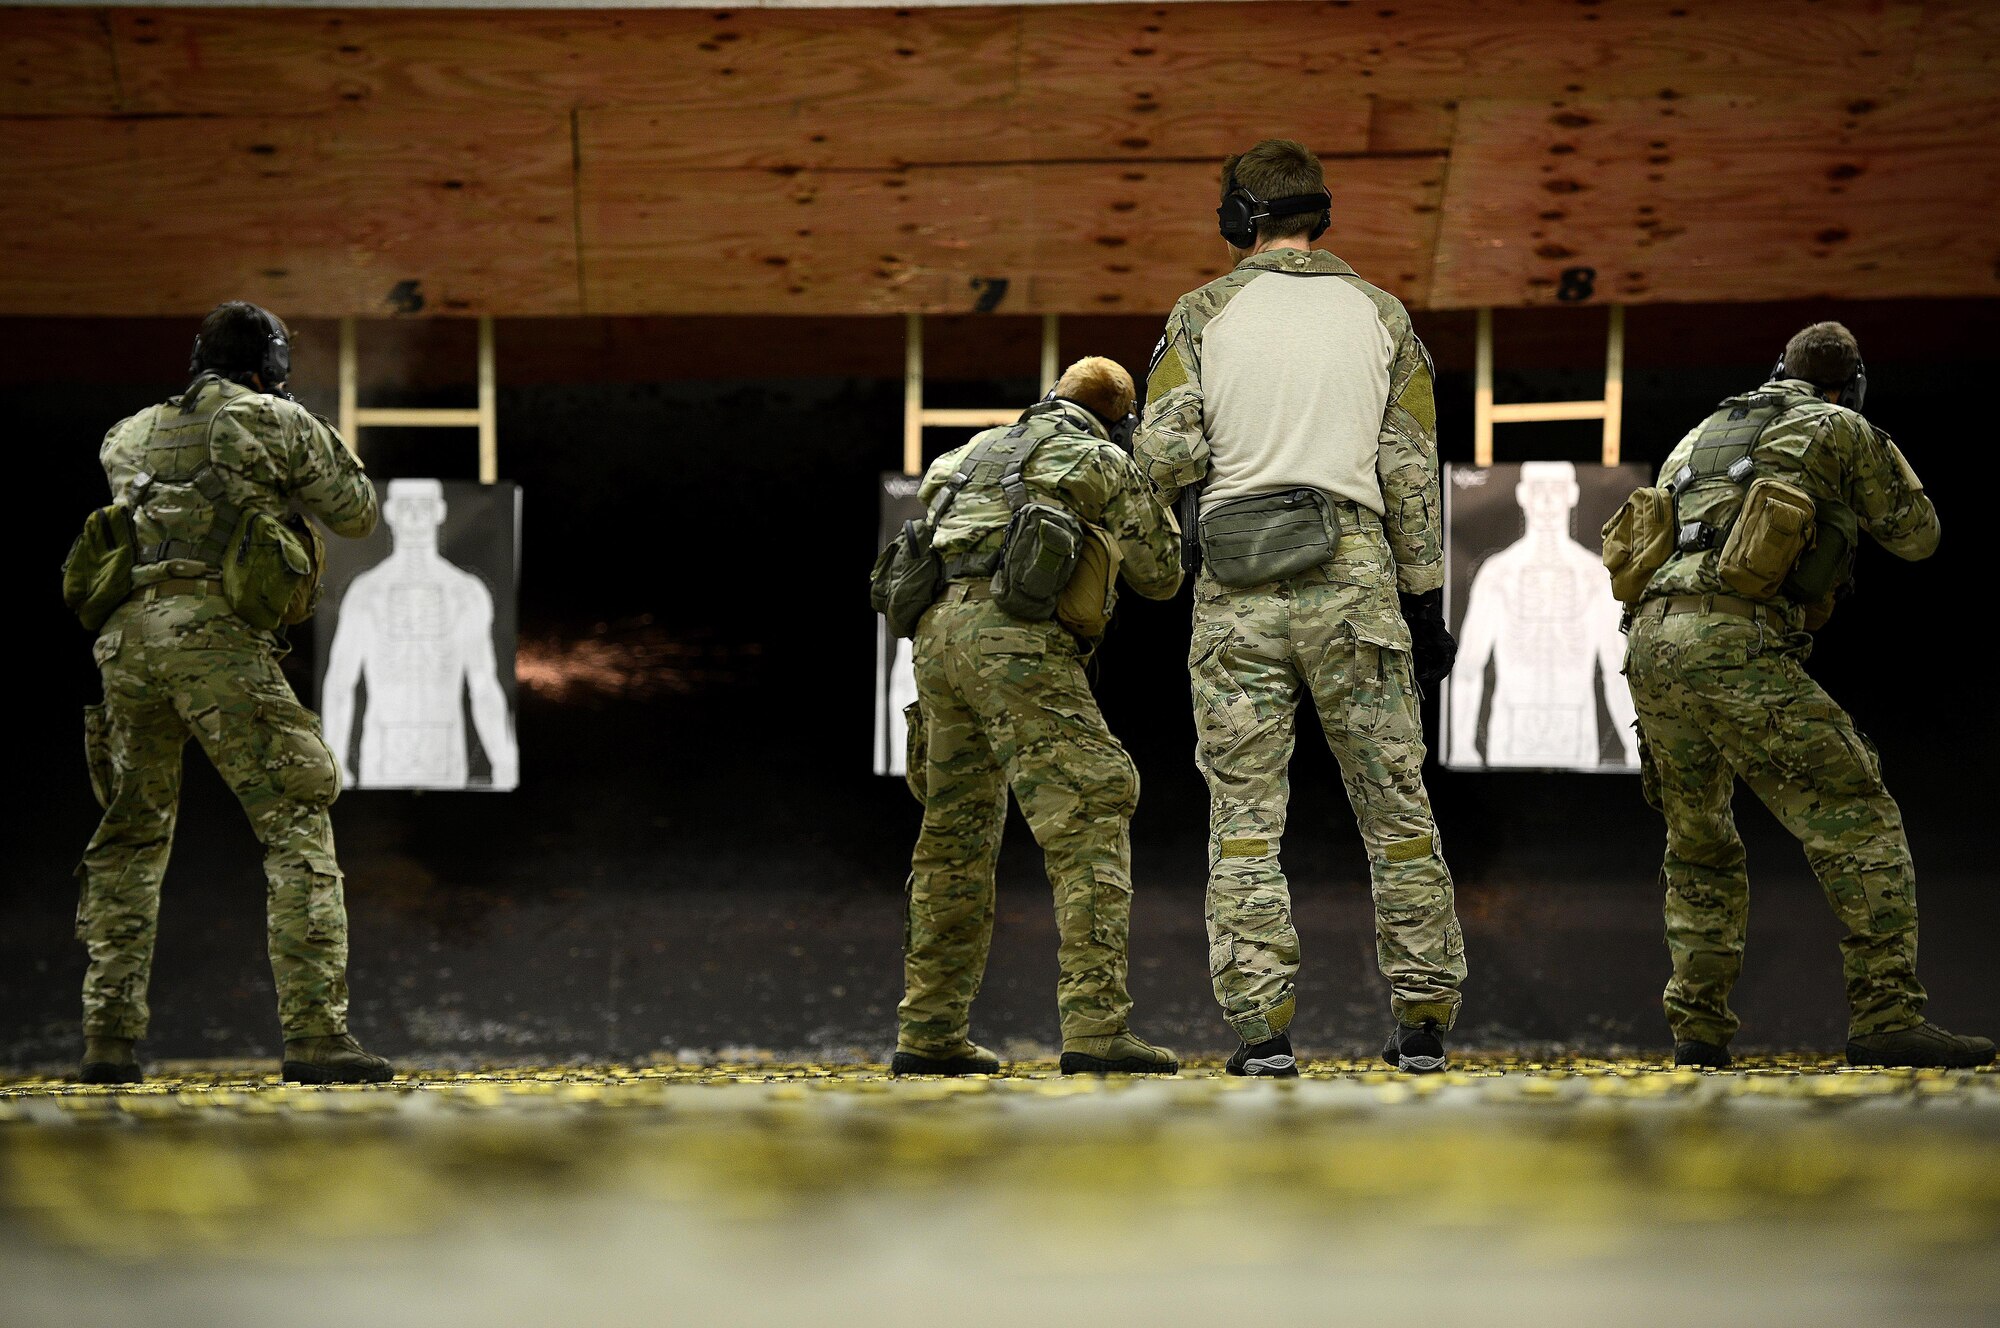 A U.S. Air Force Combat Control trainees assigned to Operating Location C, 342nd Training Squadron, attach their targets to wooden beams before weapons training at Pope Army Air Field, N.C., Feb. 11, 2015. Before earning their berets, CCT and Special Operations Weather Team trainees must complete four months of intense training at Pope in addition to several months of prerequisite training. (U.S. Air Force photo by Airman 1st Class Michael Cossaboom)